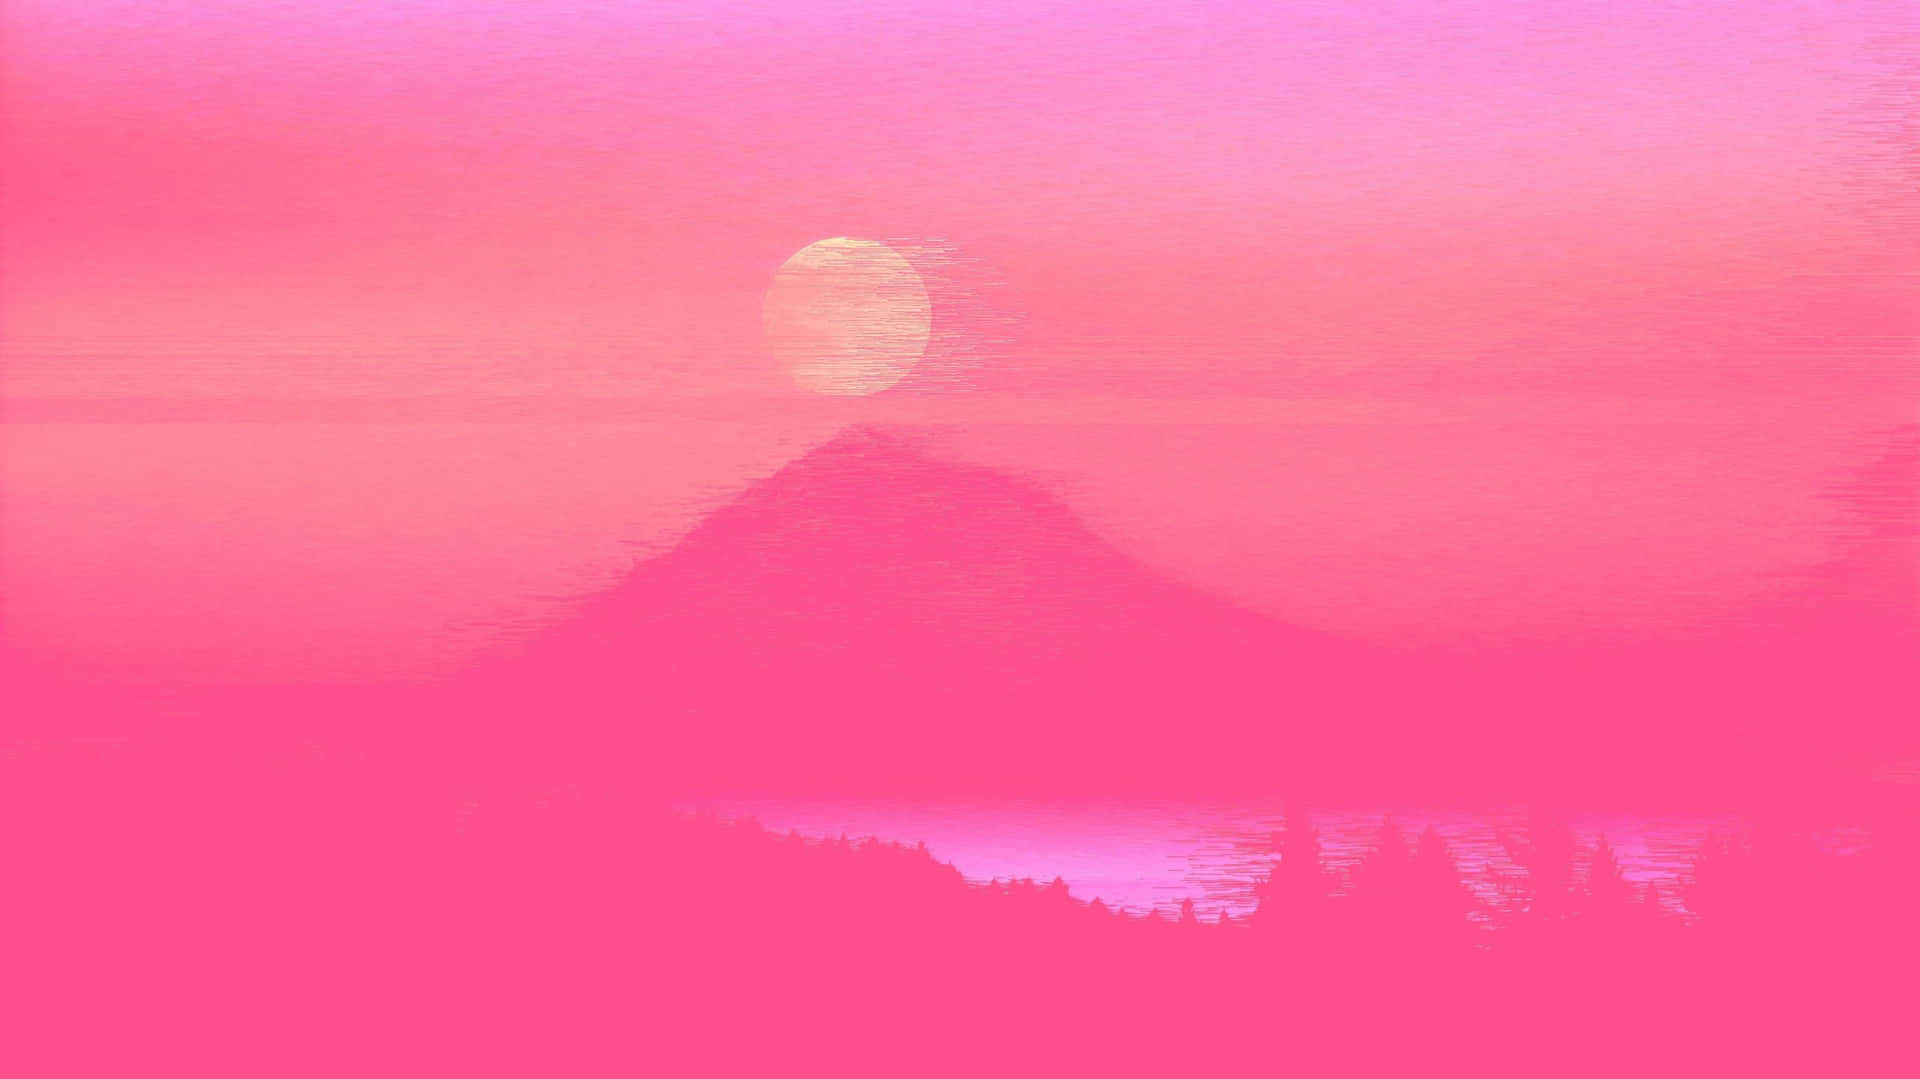 Desktop Pink Aesthetic Foggy Mountain And Moon Wallpaper